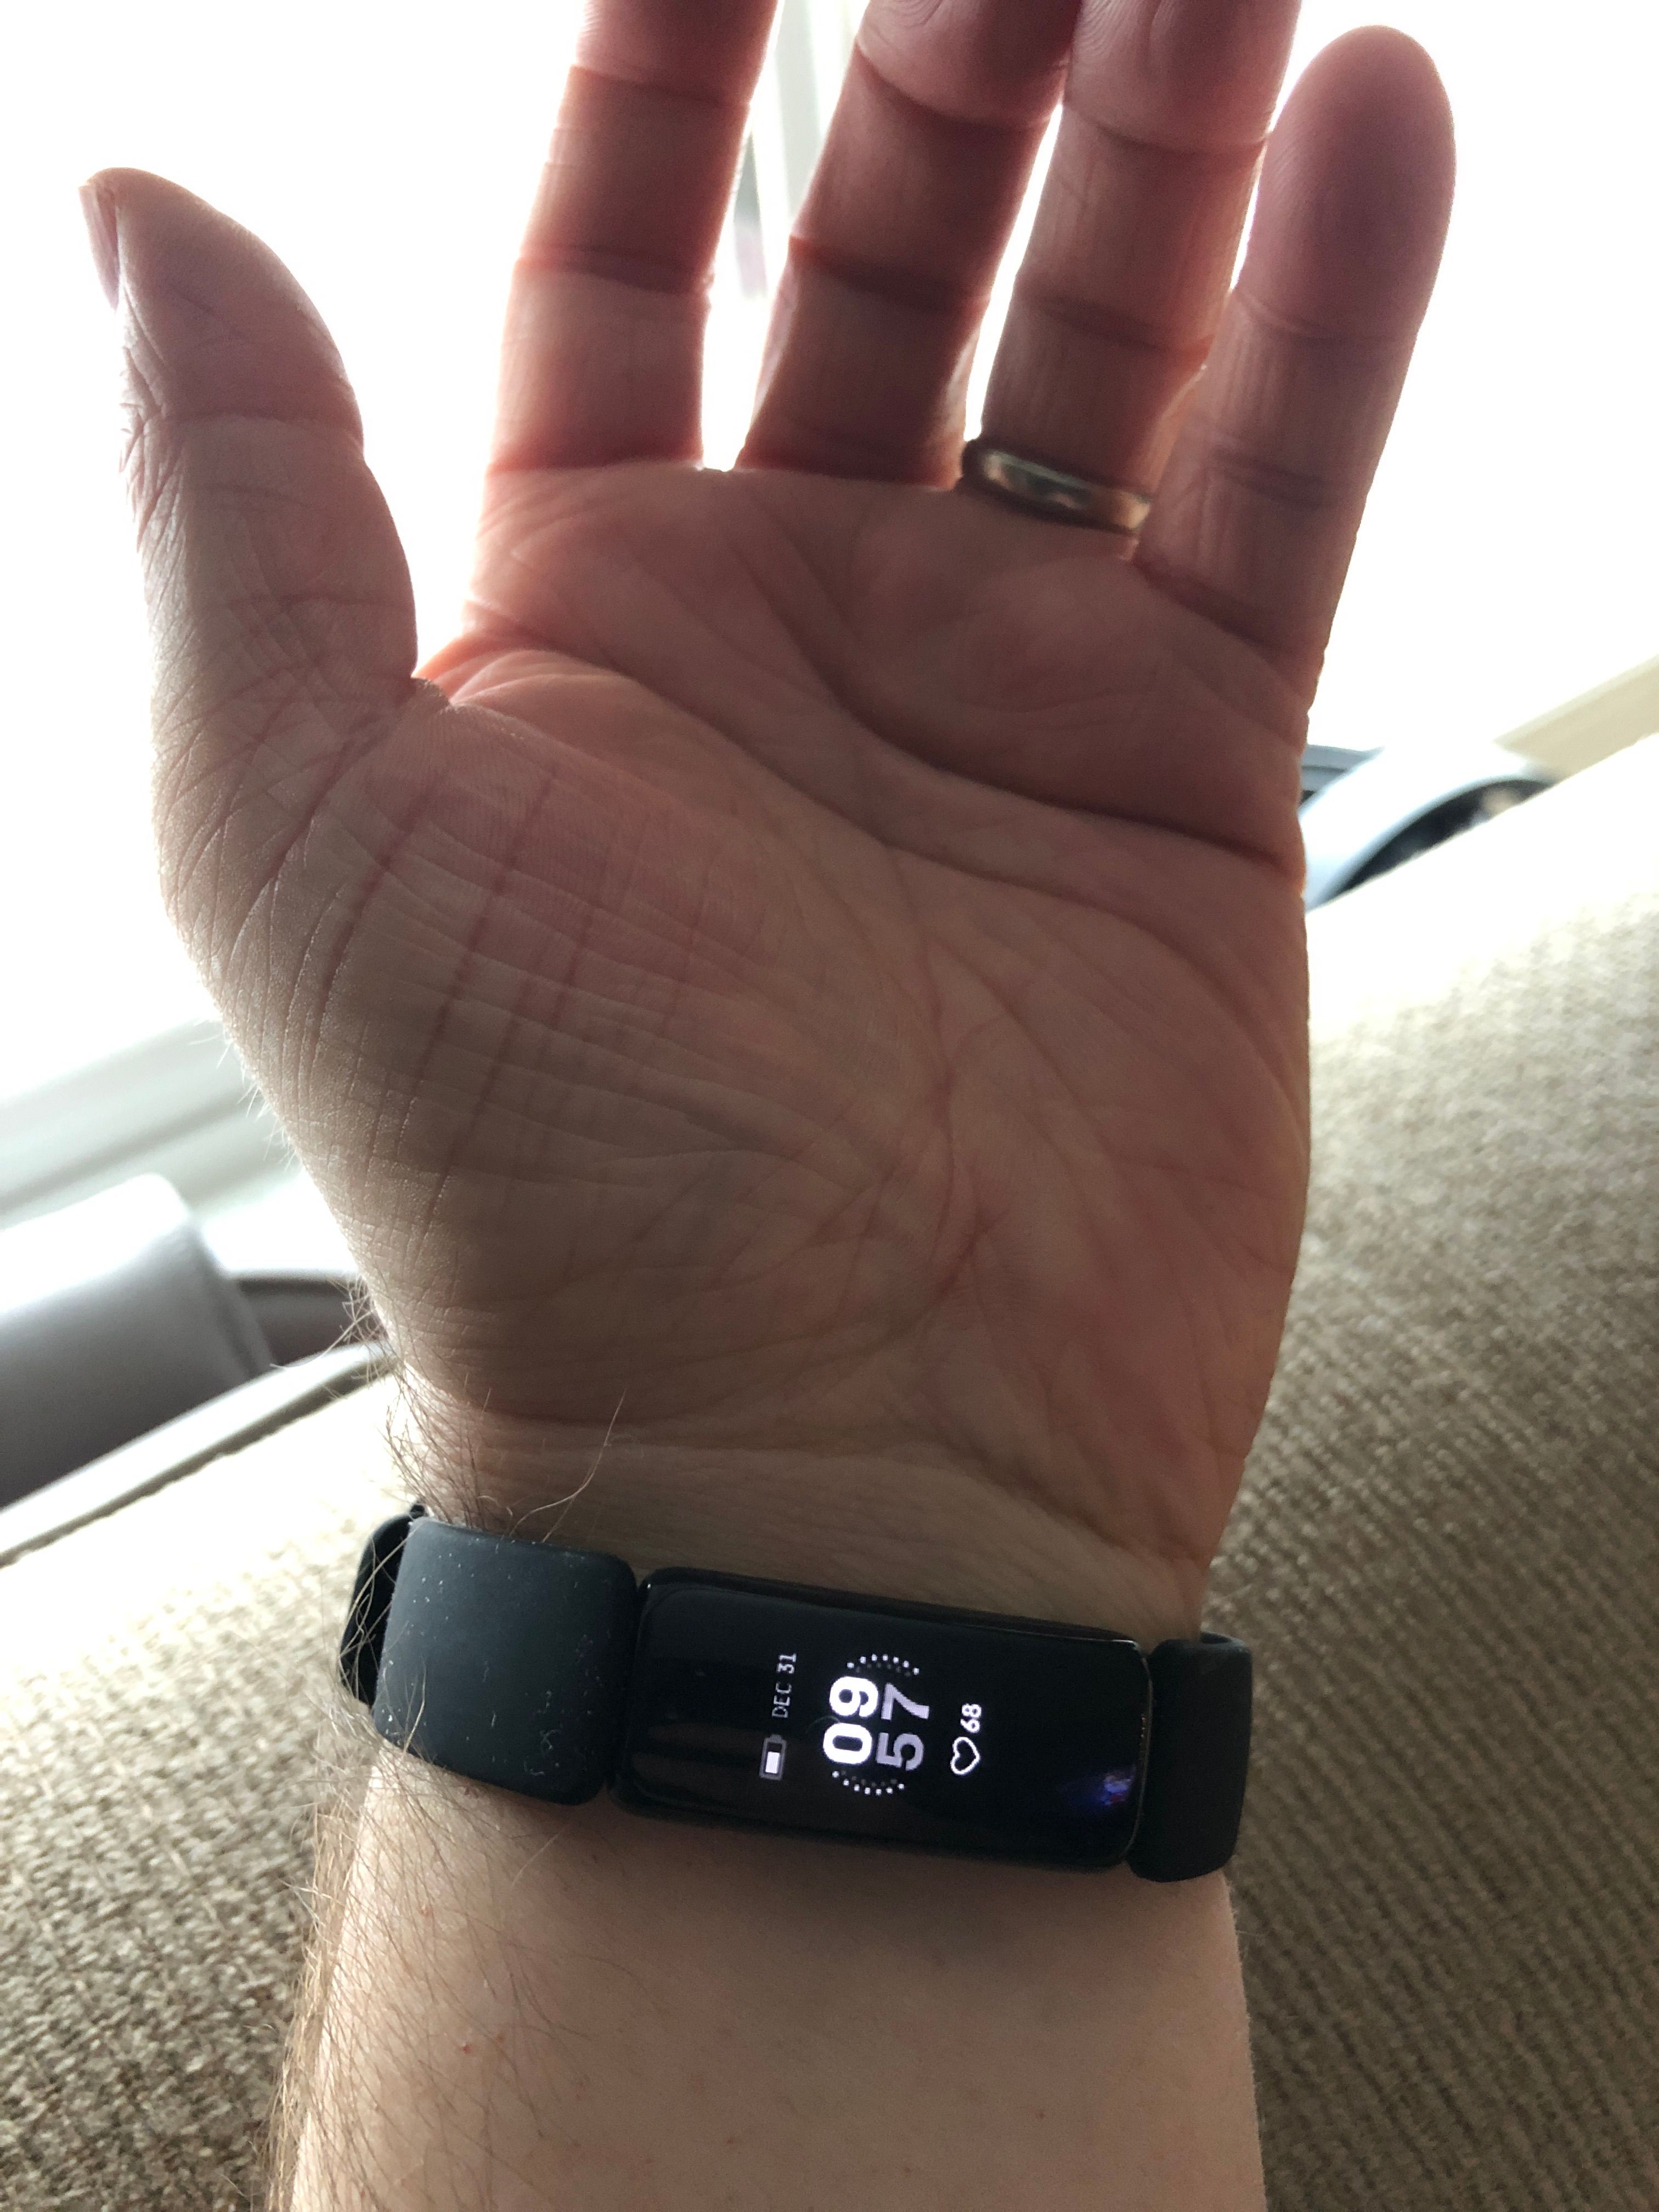 dnd on fitbit